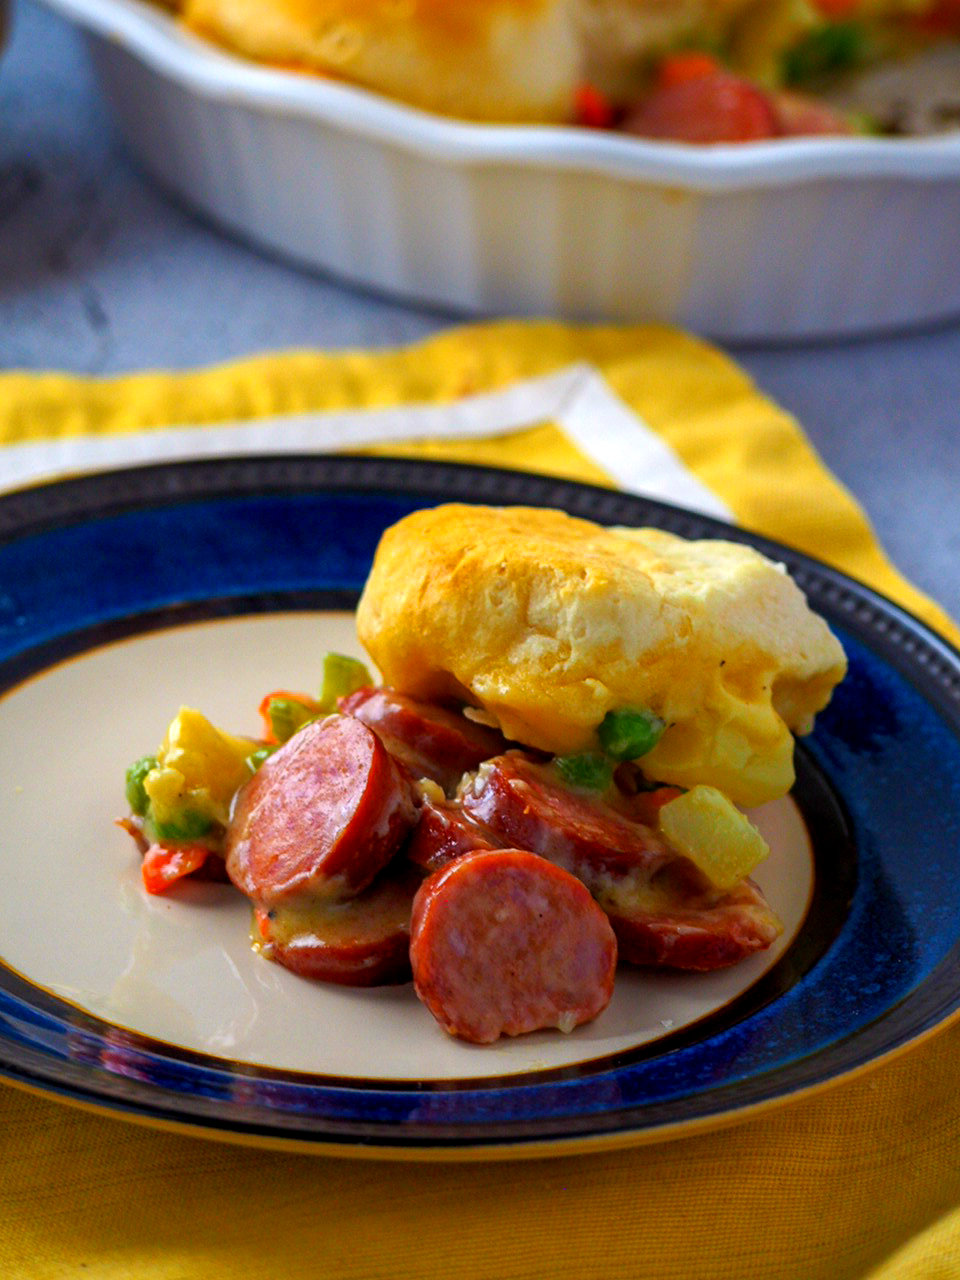 A serving of smokies and veggies pot pie in a plate.